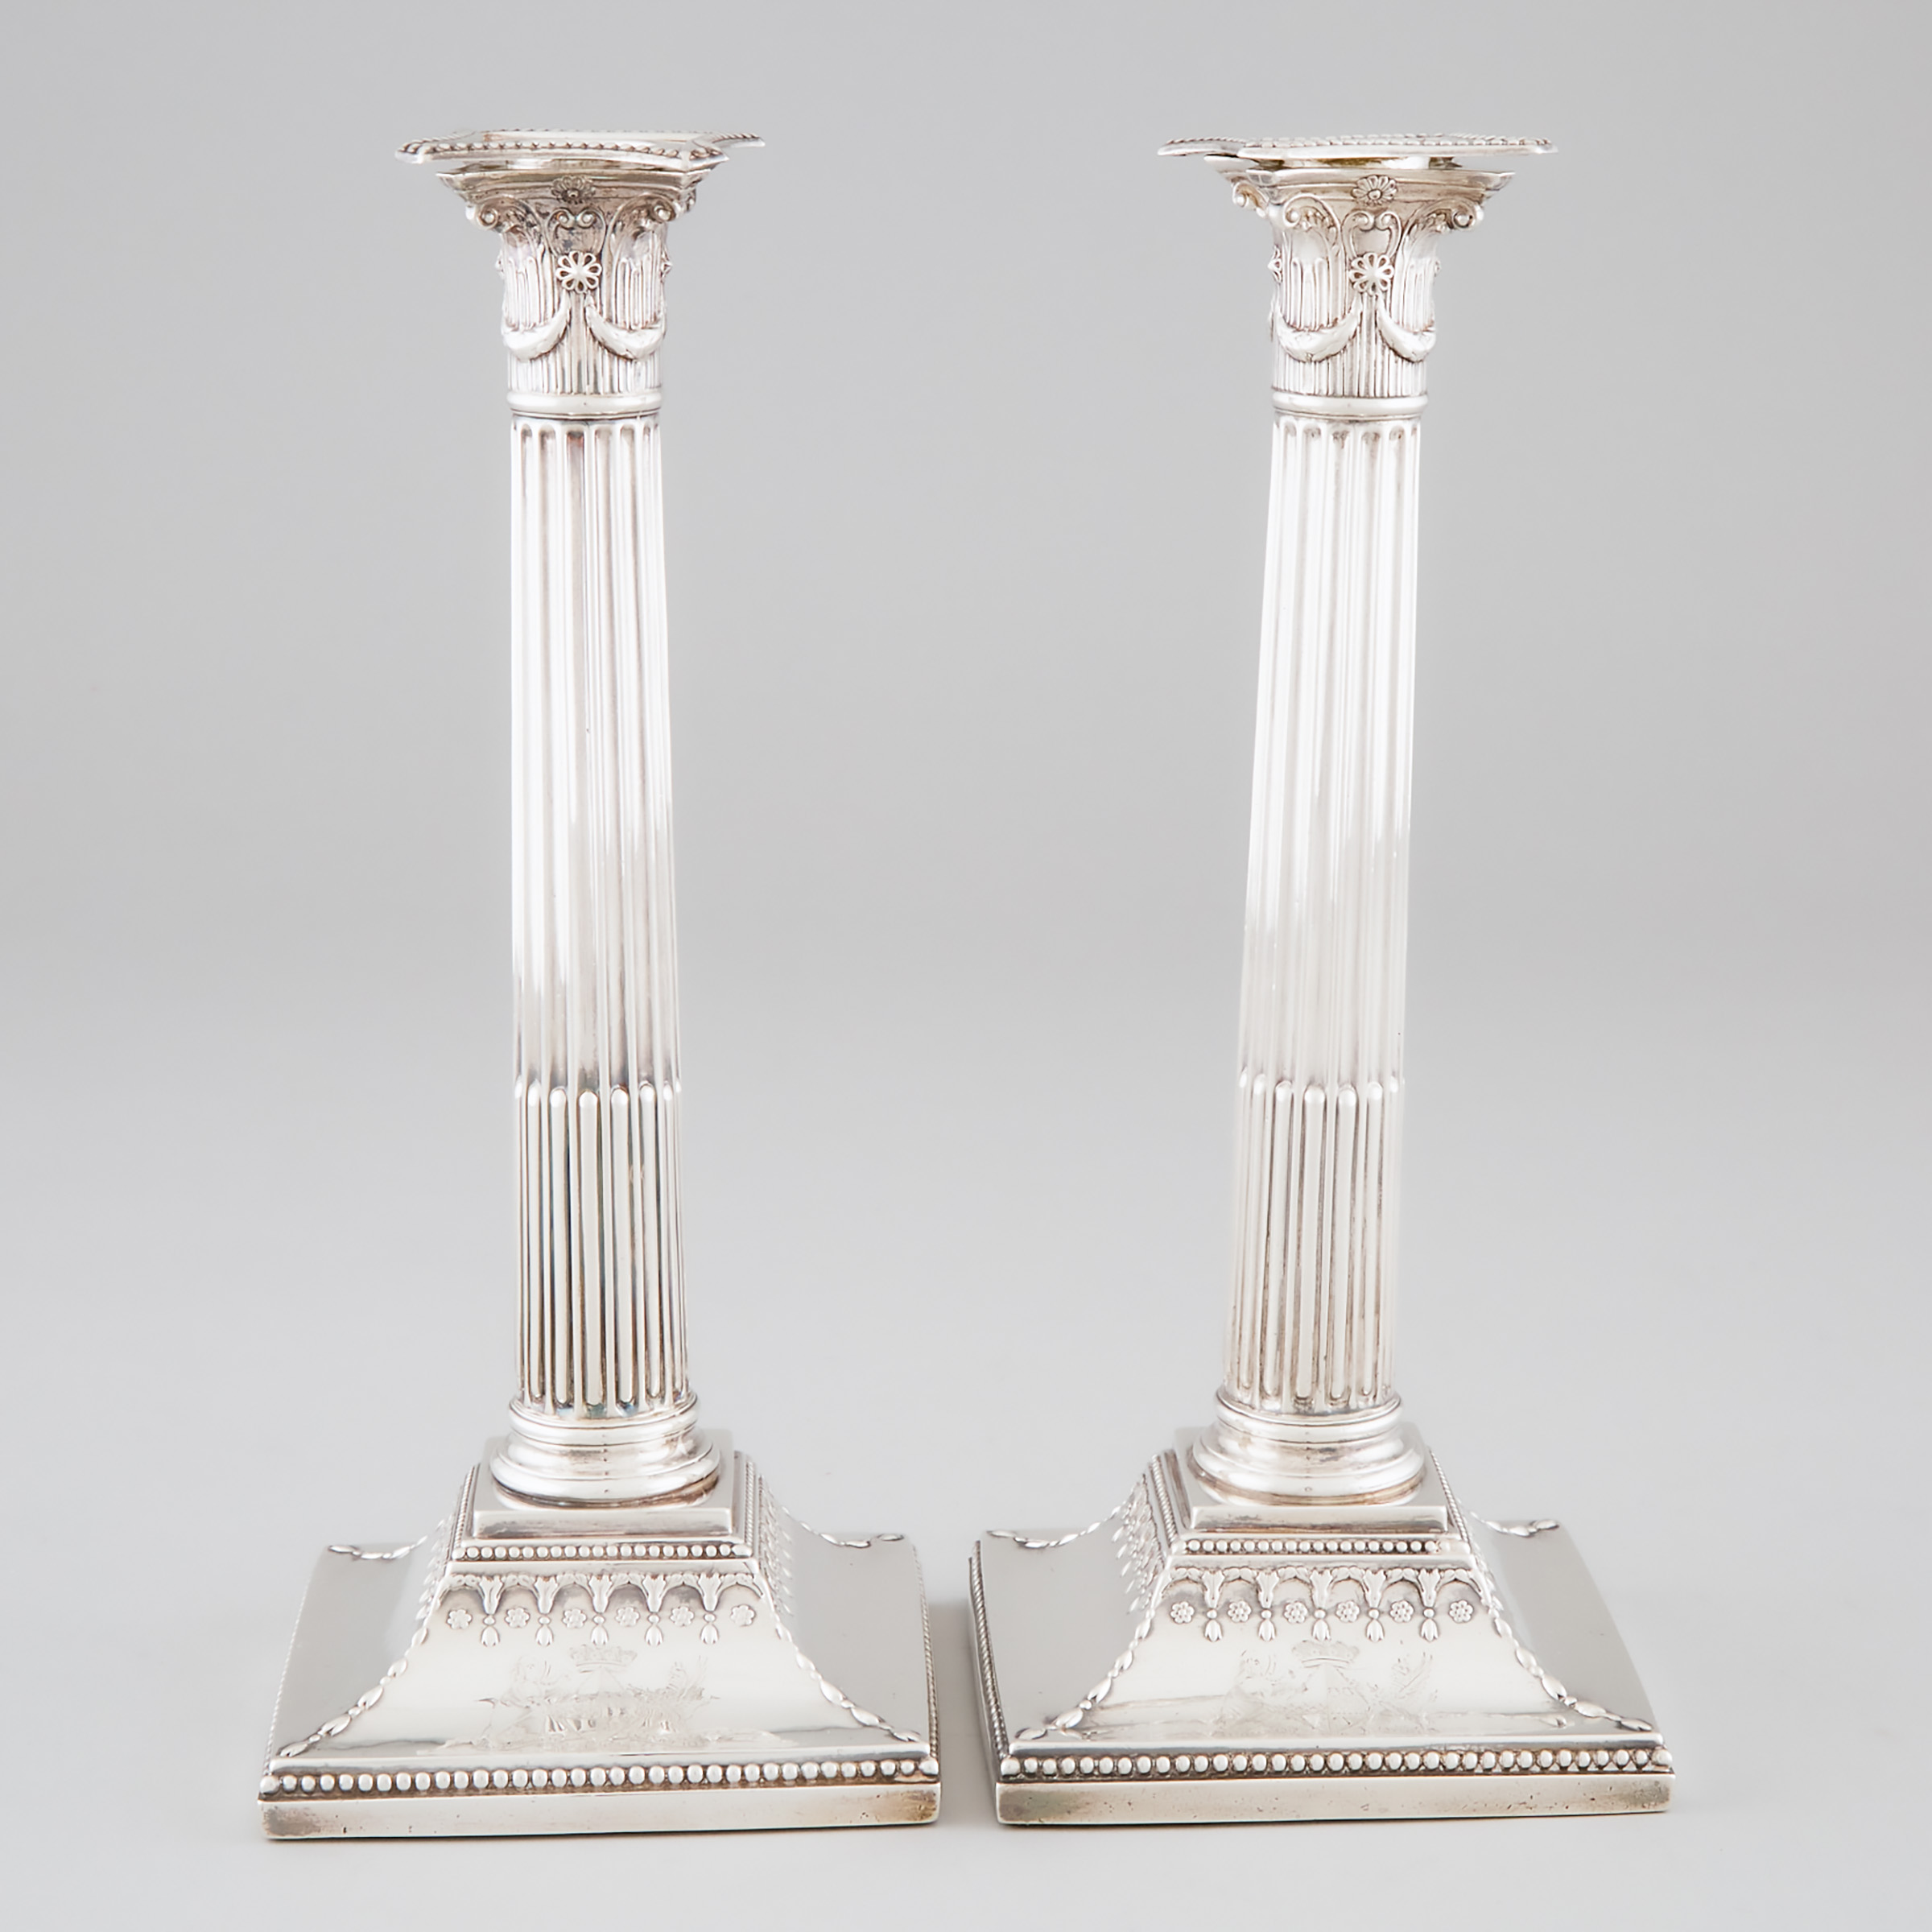 Pair of George III Silver Table Candlesticks, John Parsons & Co., Sheffield, 1788